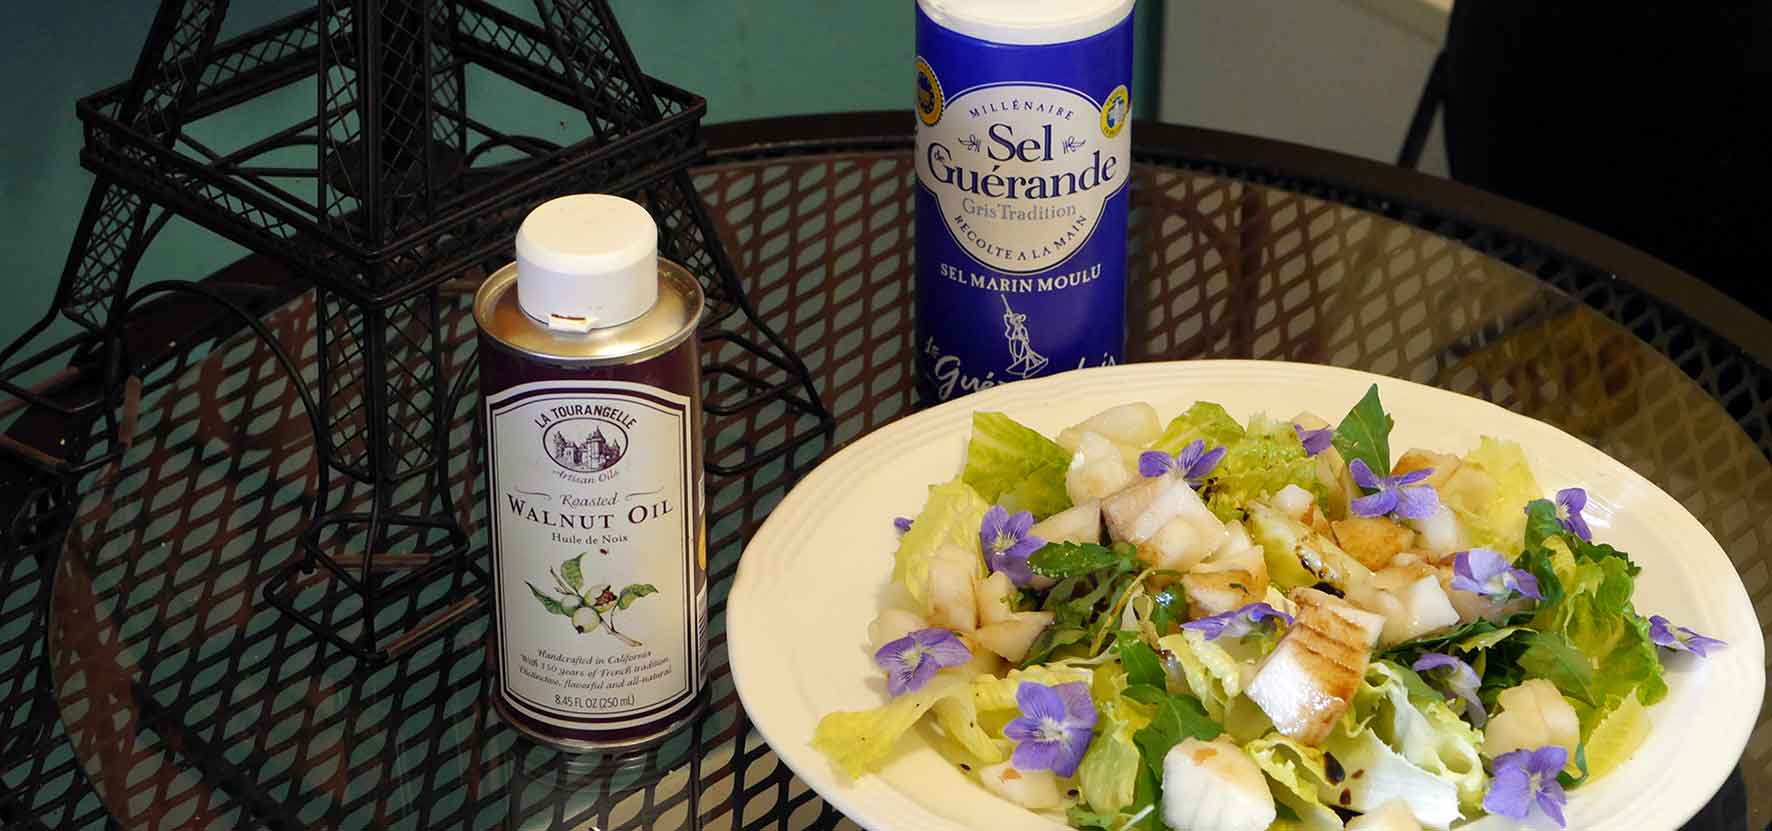 arugula, pear & wild violet salad on plate with containers of walnut oil and French sea salt